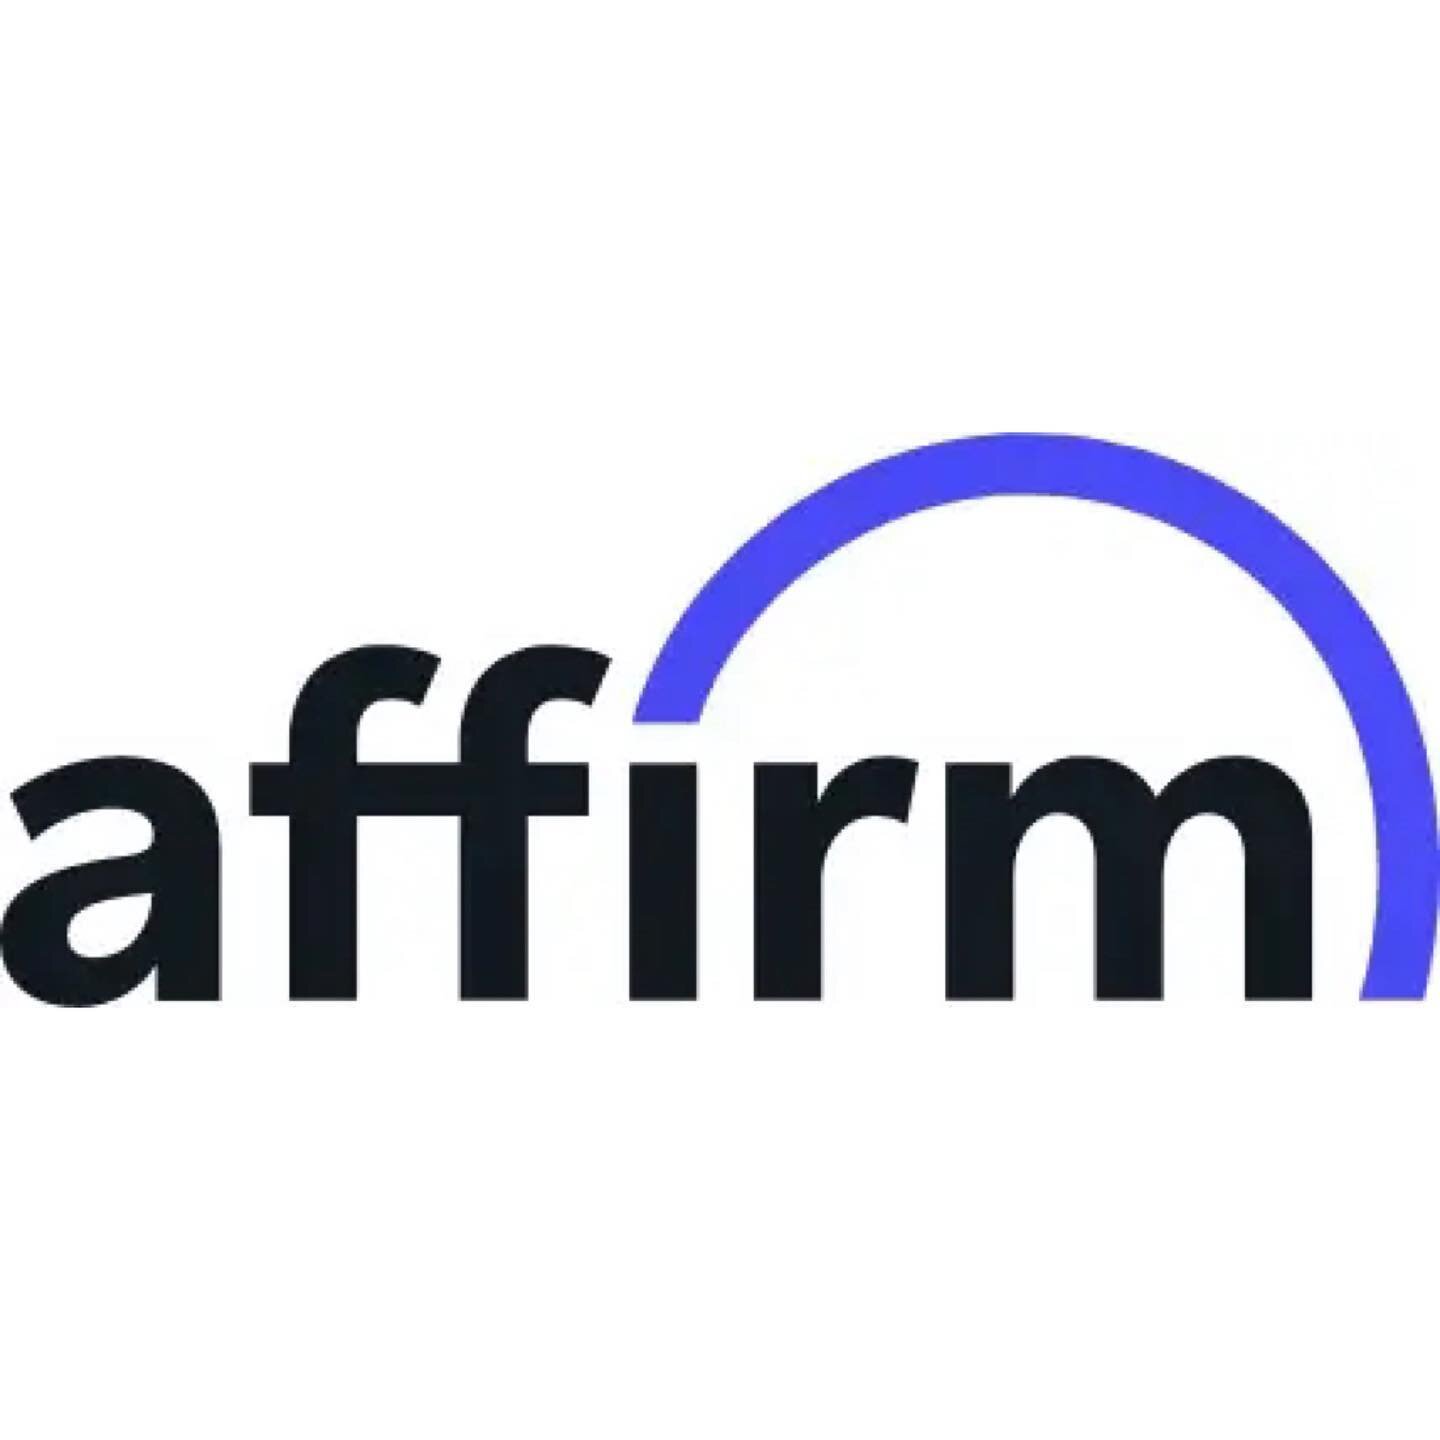 We are very excited to announce that we are now offering AFFIRM financing!! 

Affirm will be available on any order above $1,500.00 (CAD$). Get started by submitting a quote request. Upon placing an order, a secure payment link will be sent to your e